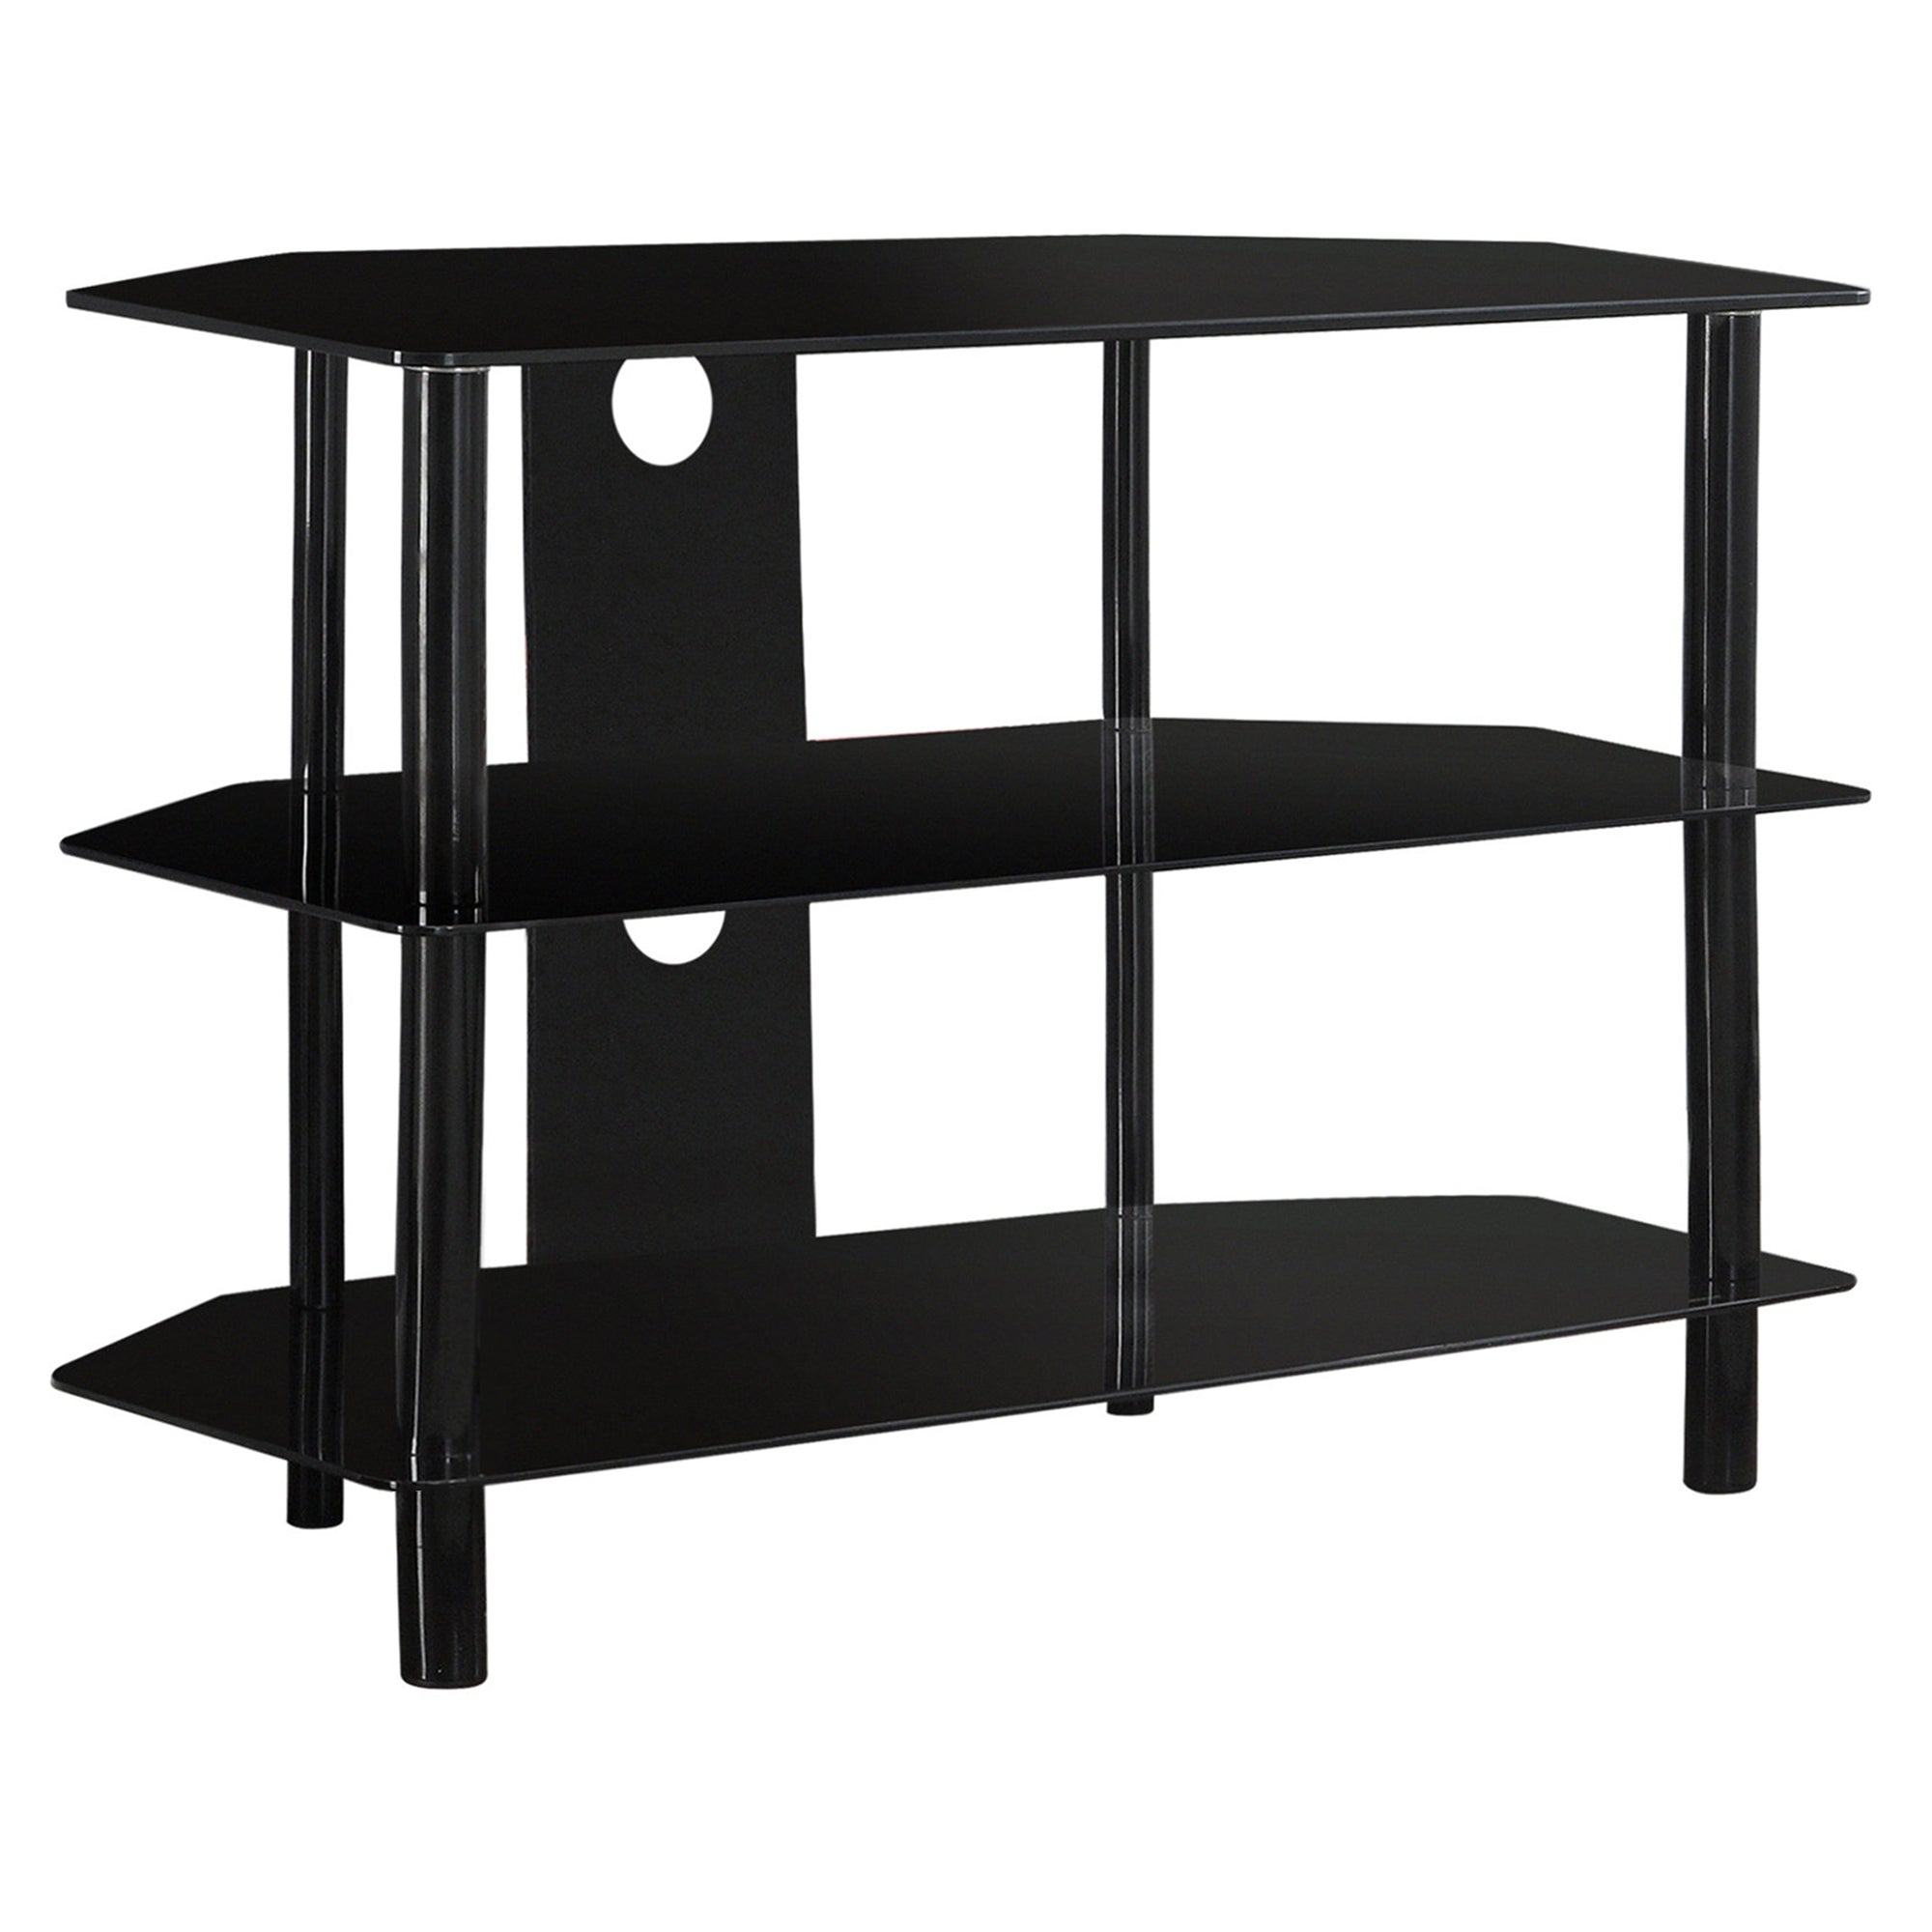 TV STAND - 36"L / BLACK METAL WITH TEMPERED BLACK GLASS